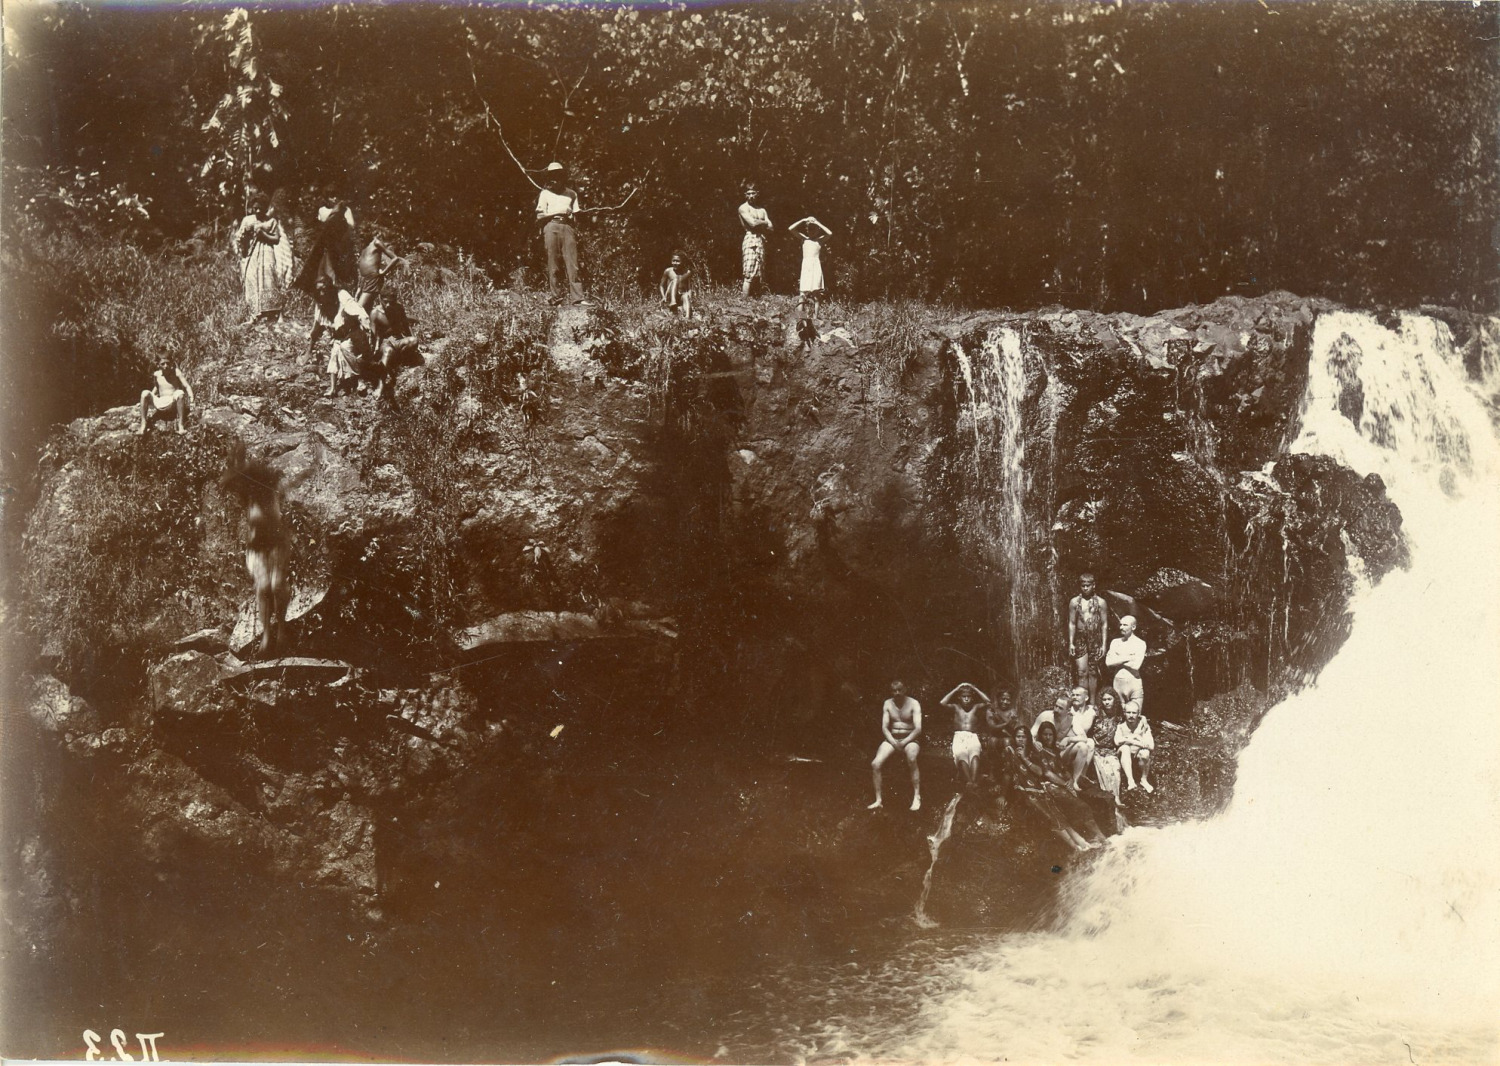 Samoa, Samoa Natives and German soldiers at the river Vintage silver print.  